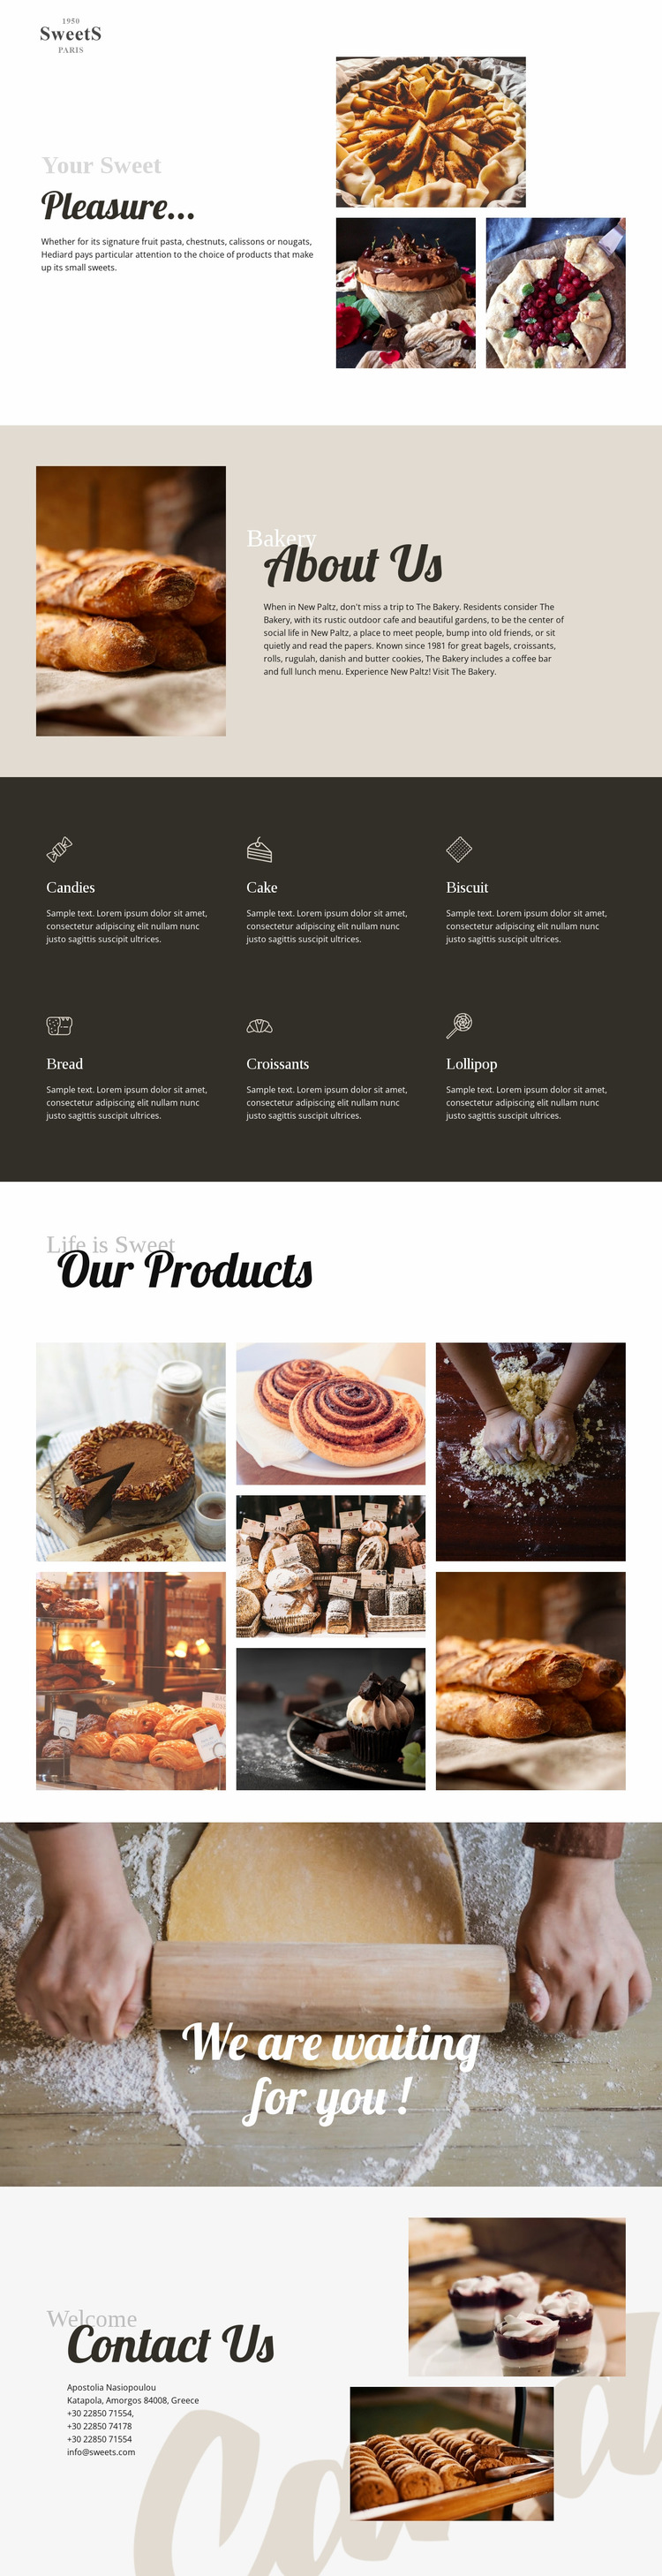 Cakes and baking food Website Mockup